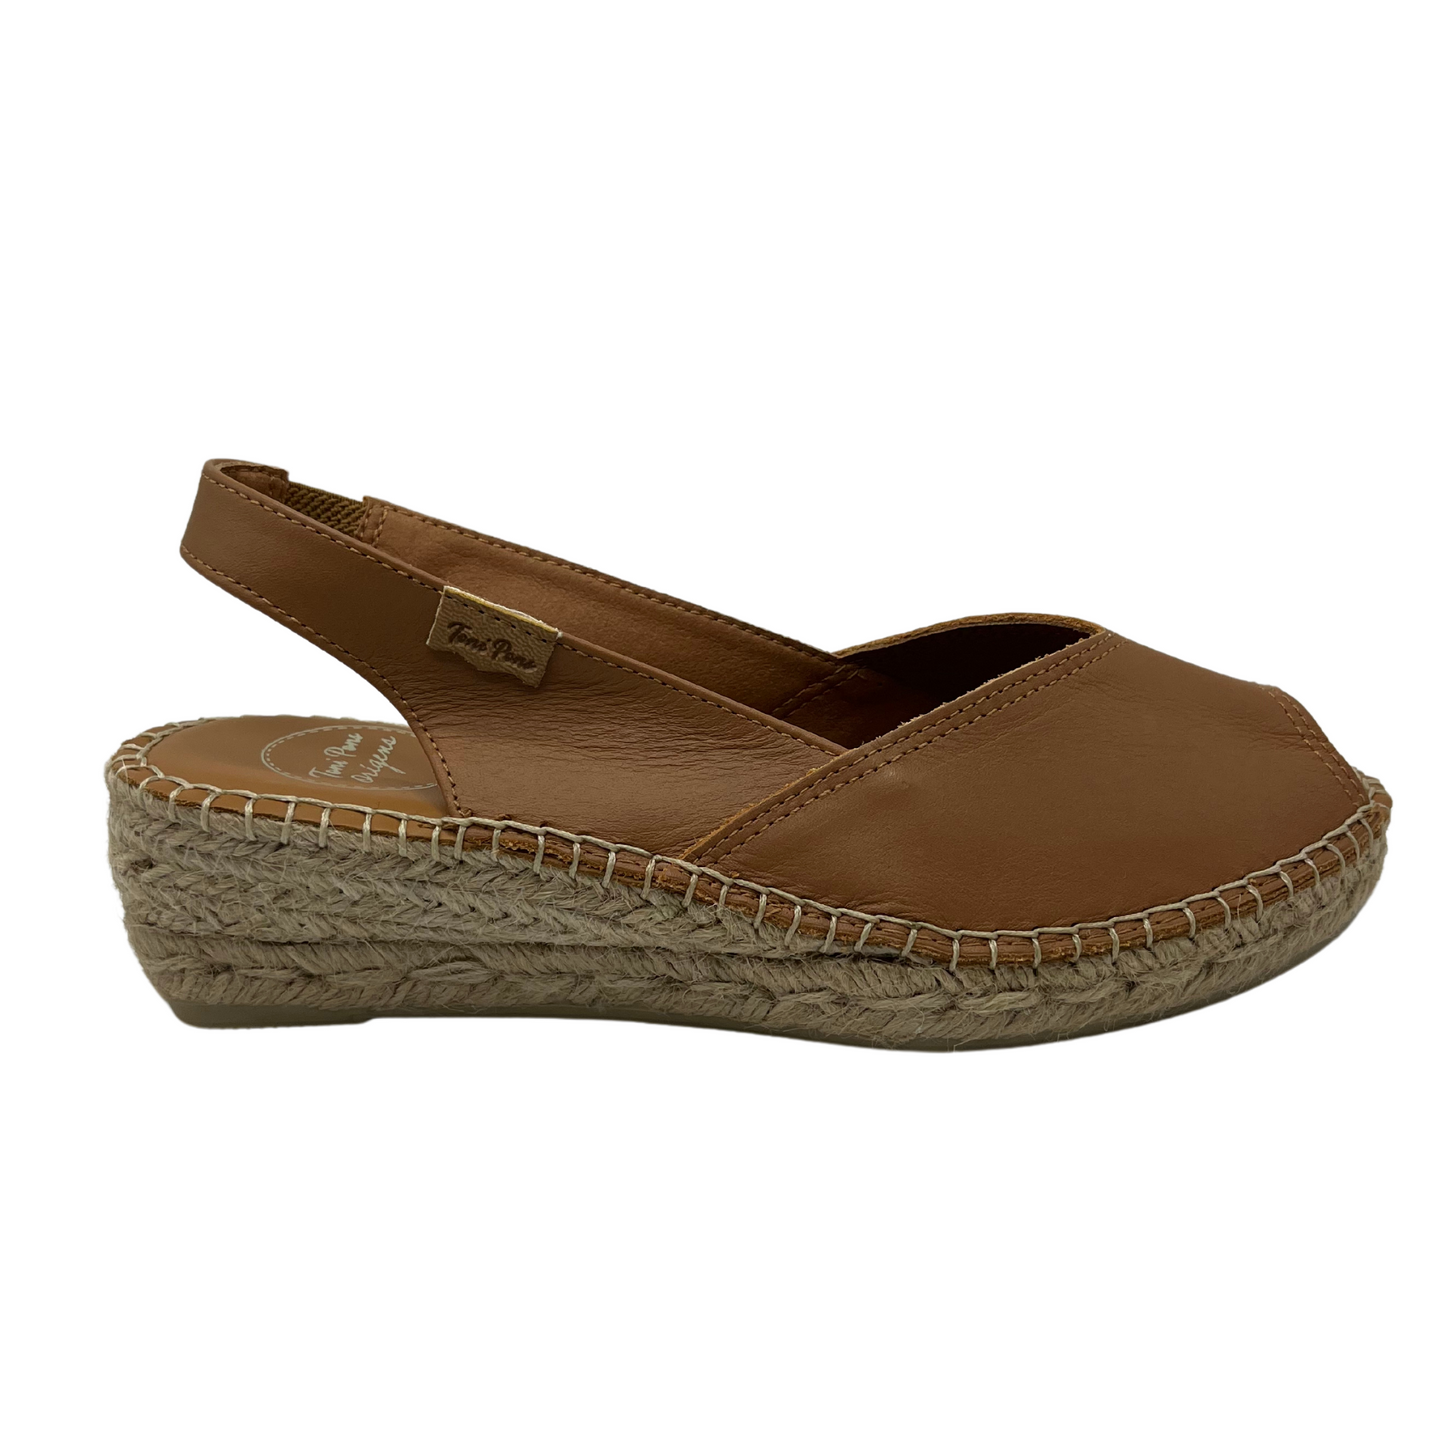 Right facing view of tan leather espadrille sandal with wedge heel and peep toe